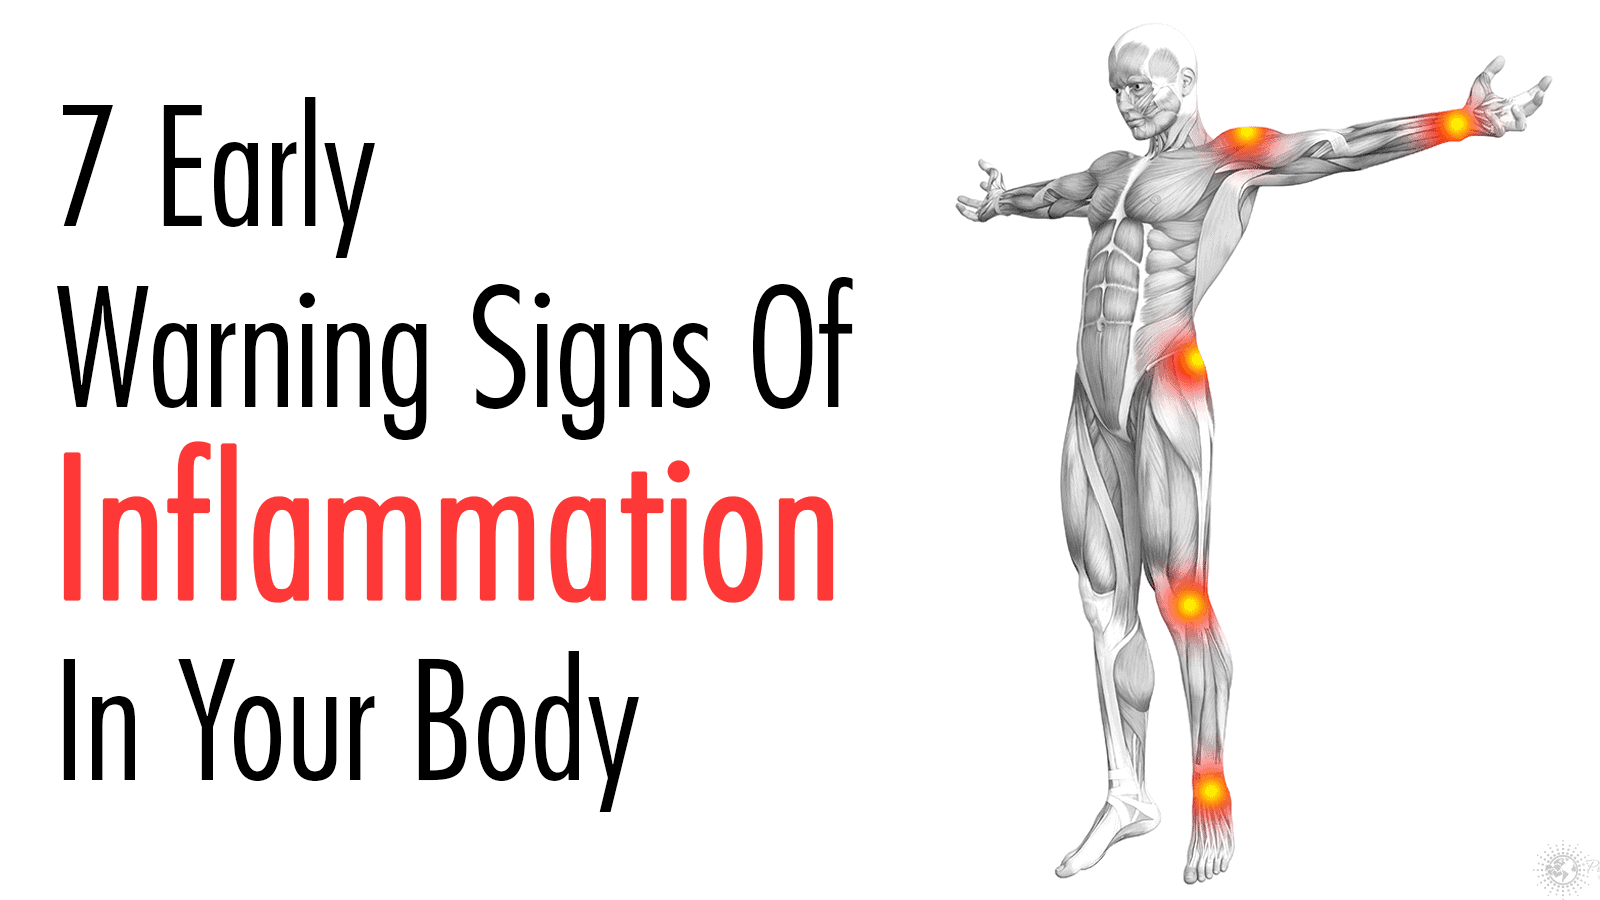 7 Early Warning Signs Of Inflammation In Your Body